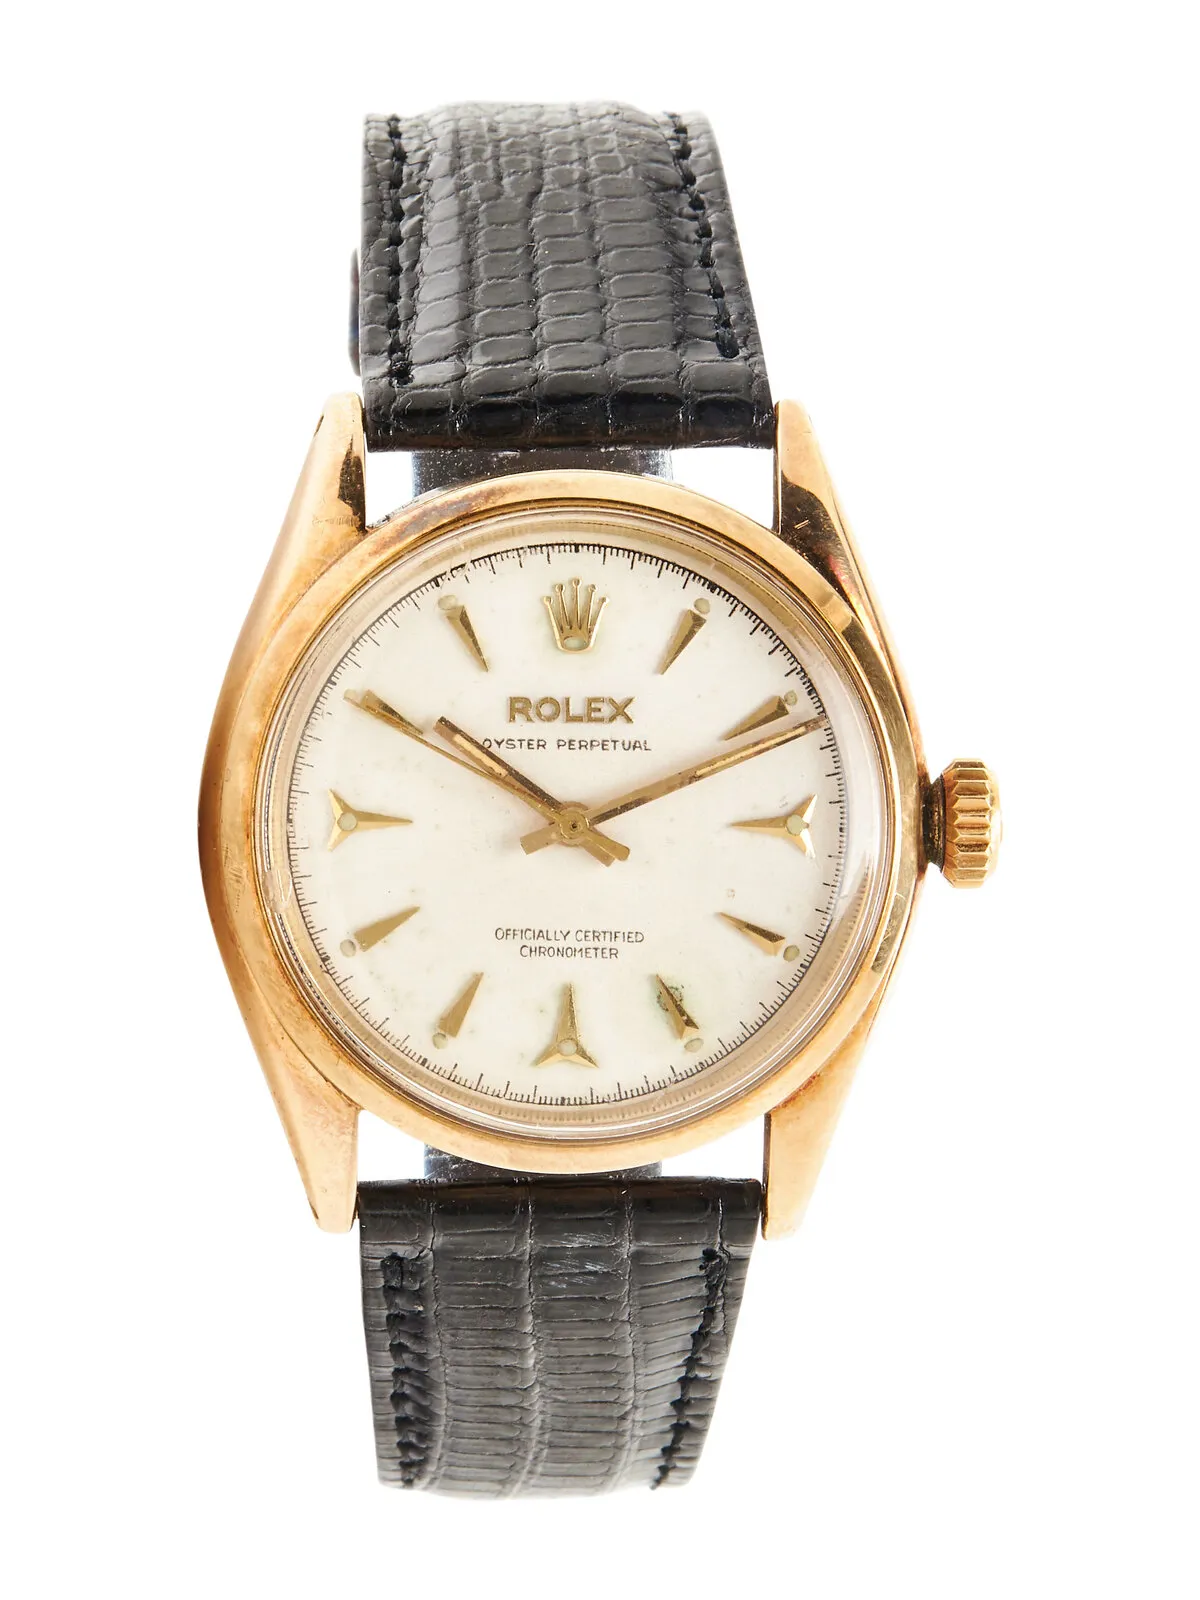 Rolex Oyster Perpetual 6584